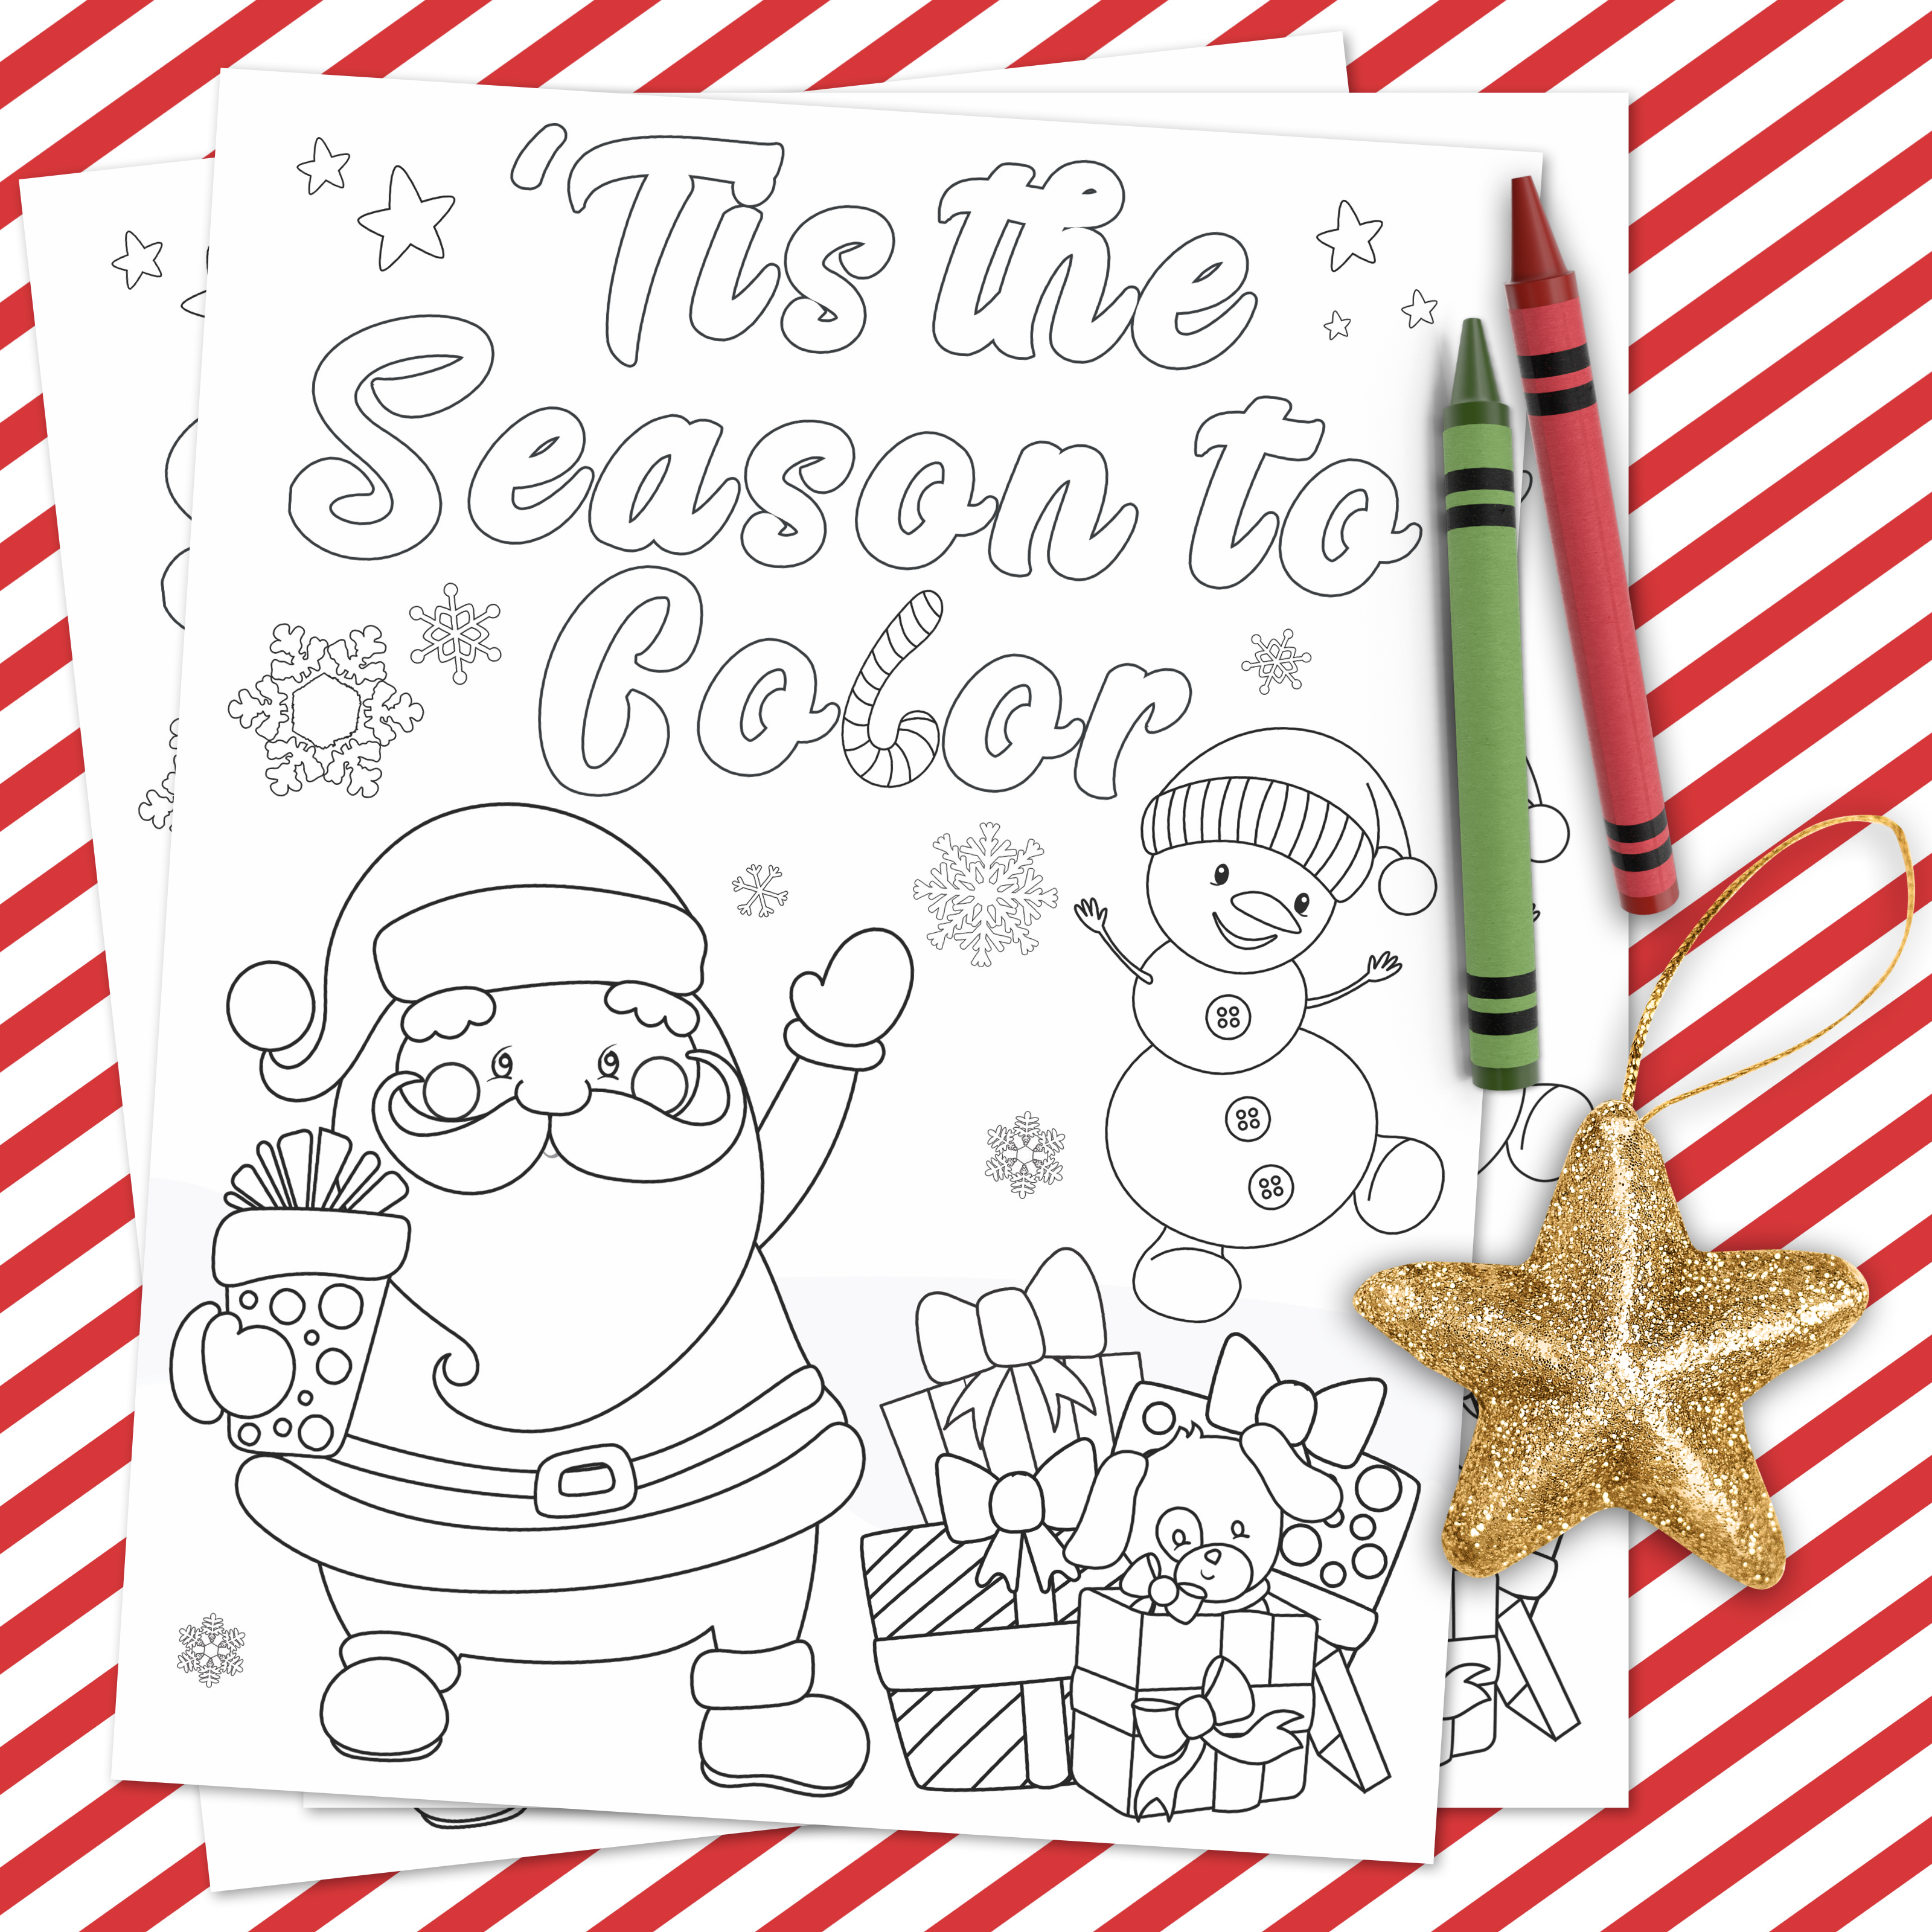 FREE Christmas Coloring Page – ‘Tis the Season to Color!